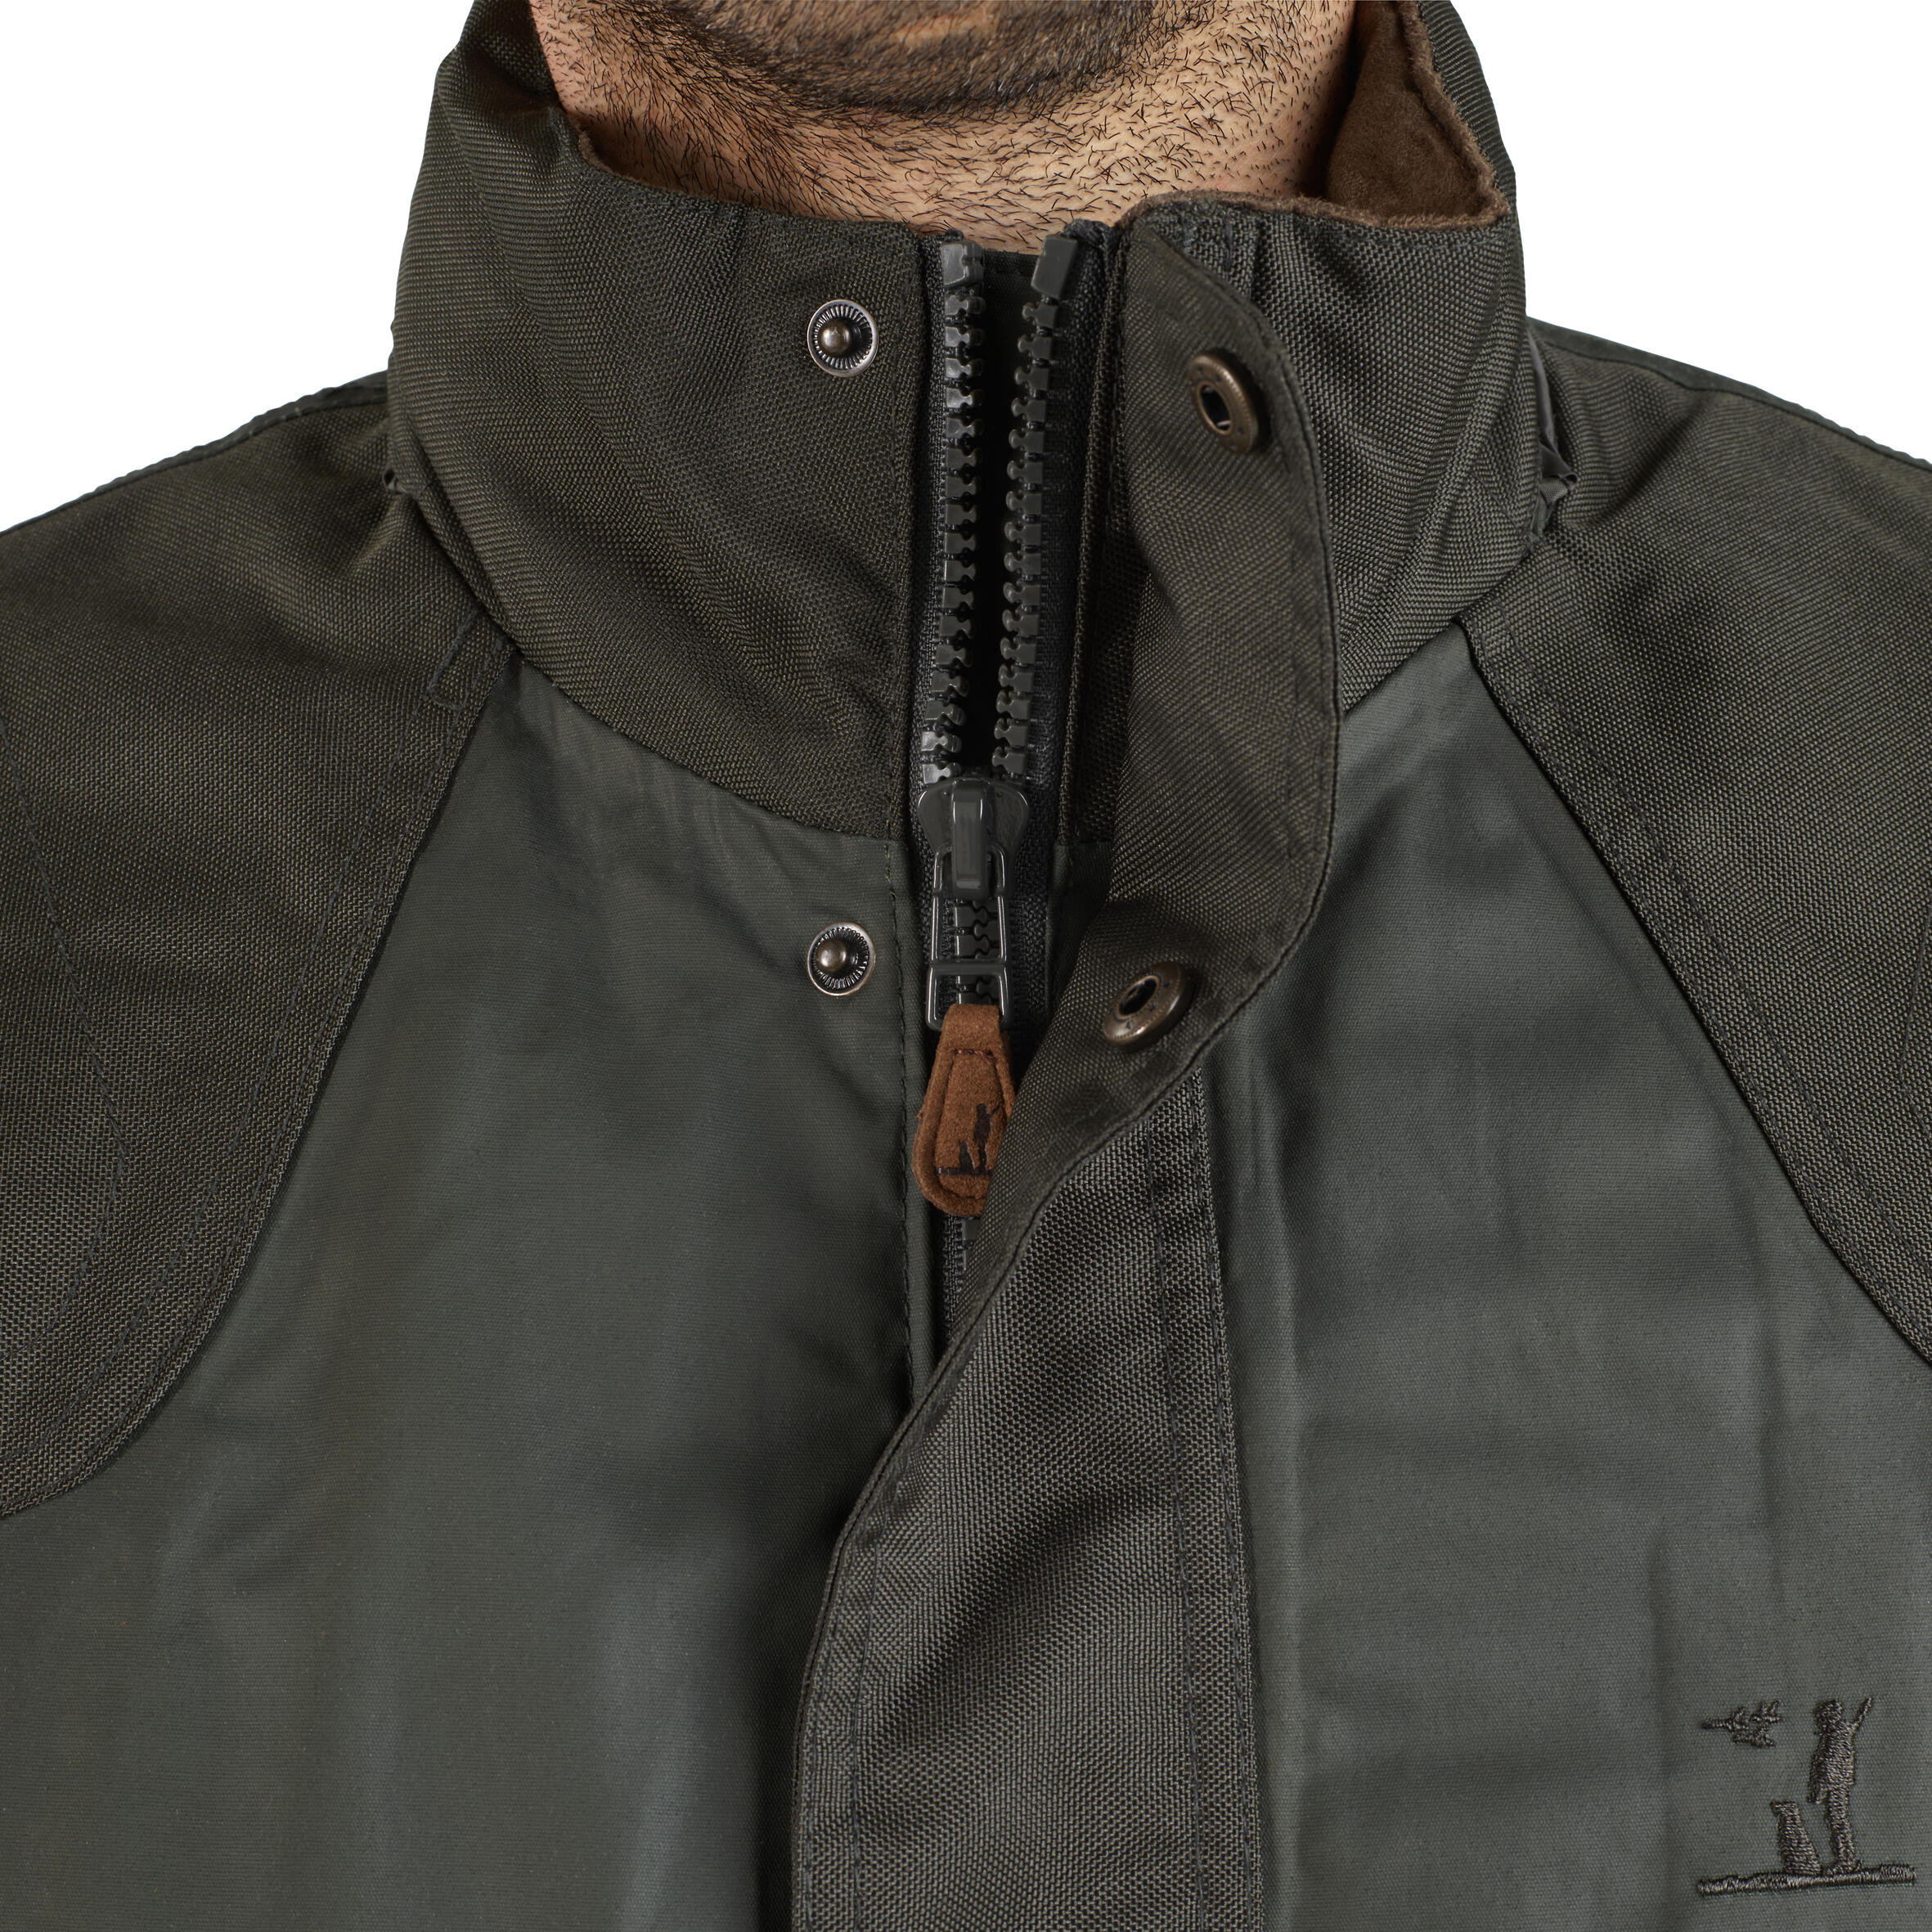 Hunting waterproof robust jacket Percussion Impertane - Green 9/13